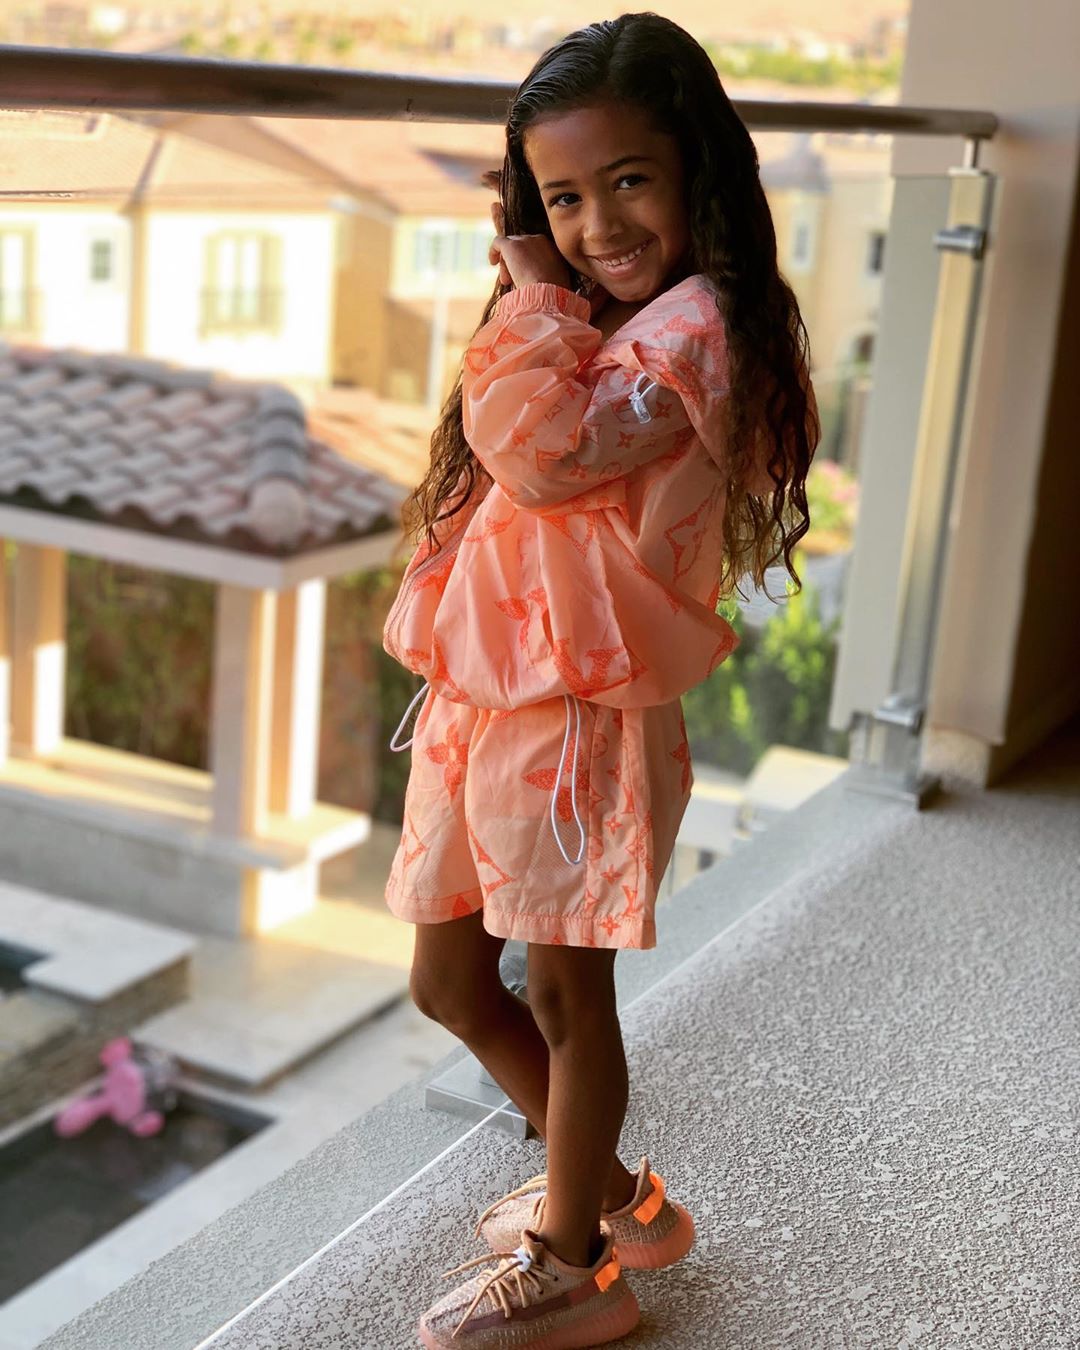 Chris Brwon already had a five-year-old daughter, named Royalty with Nia Guzman. [Instagram/ChrisBrownOfficial]